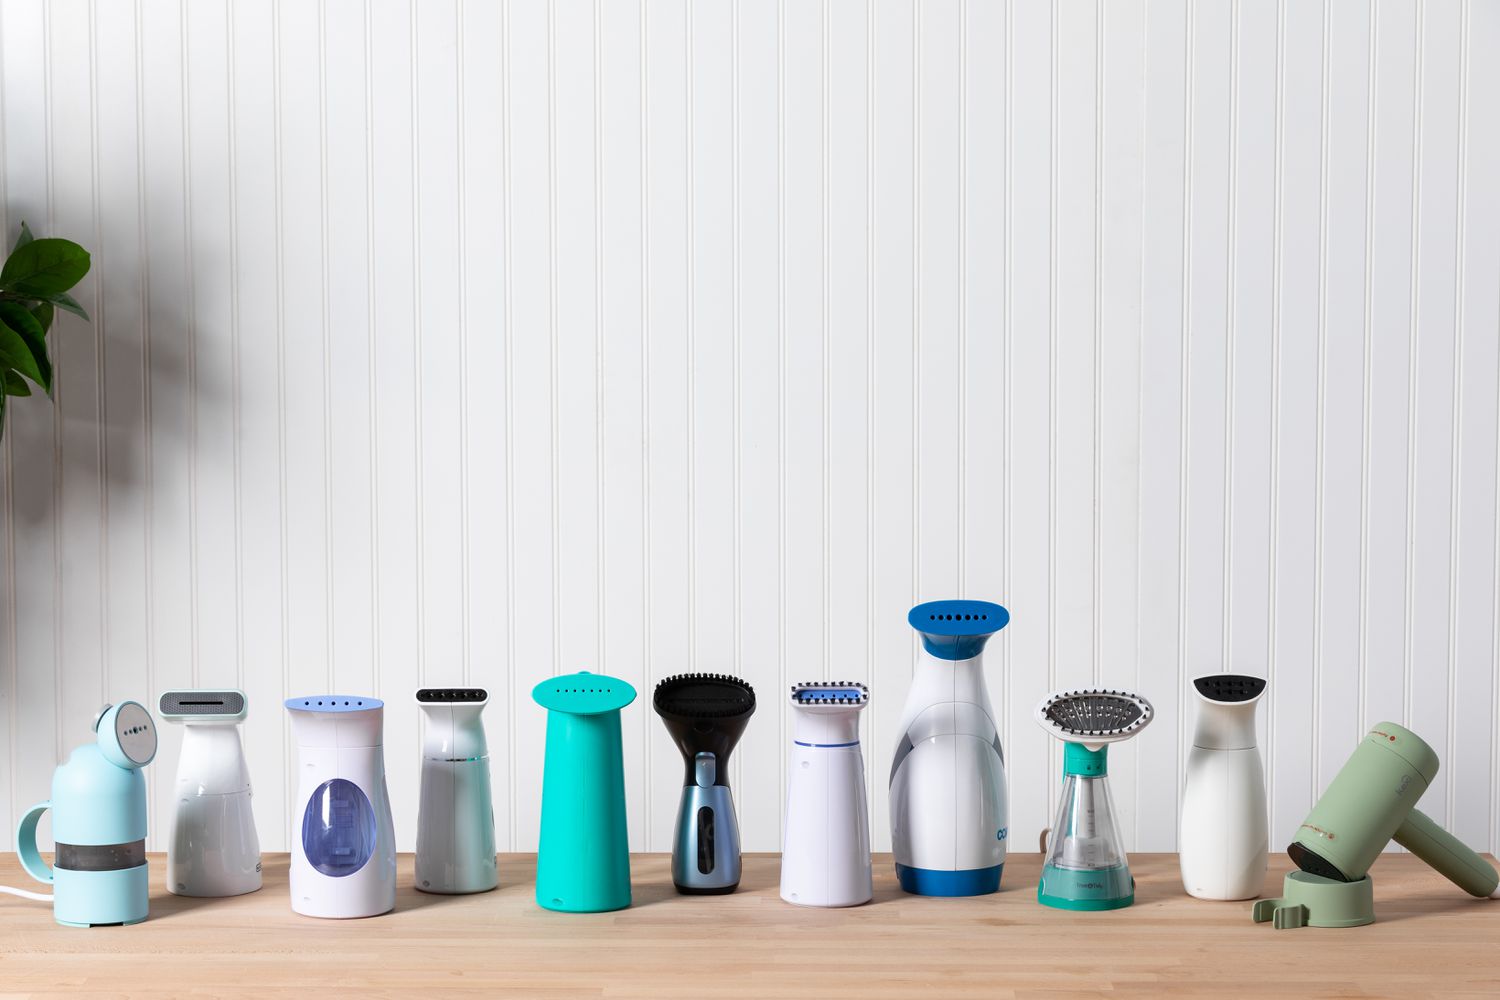 Where To Buy A Handheld Steamer